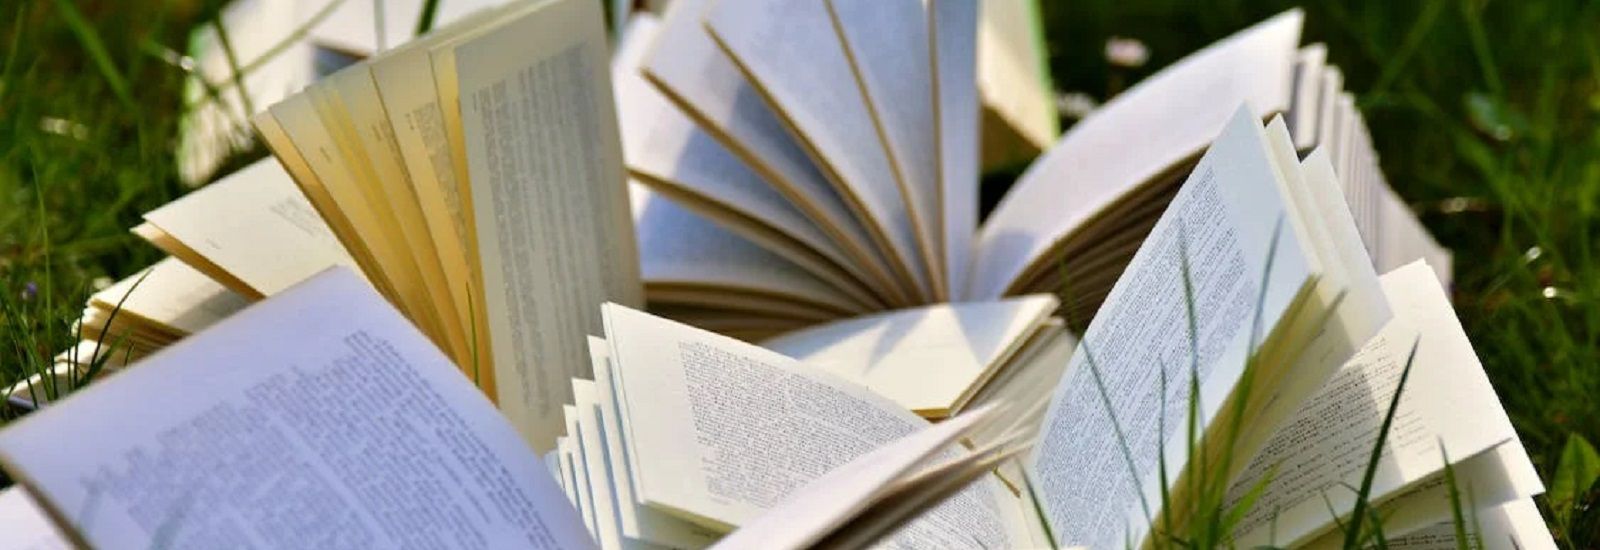 Pile of books banner image